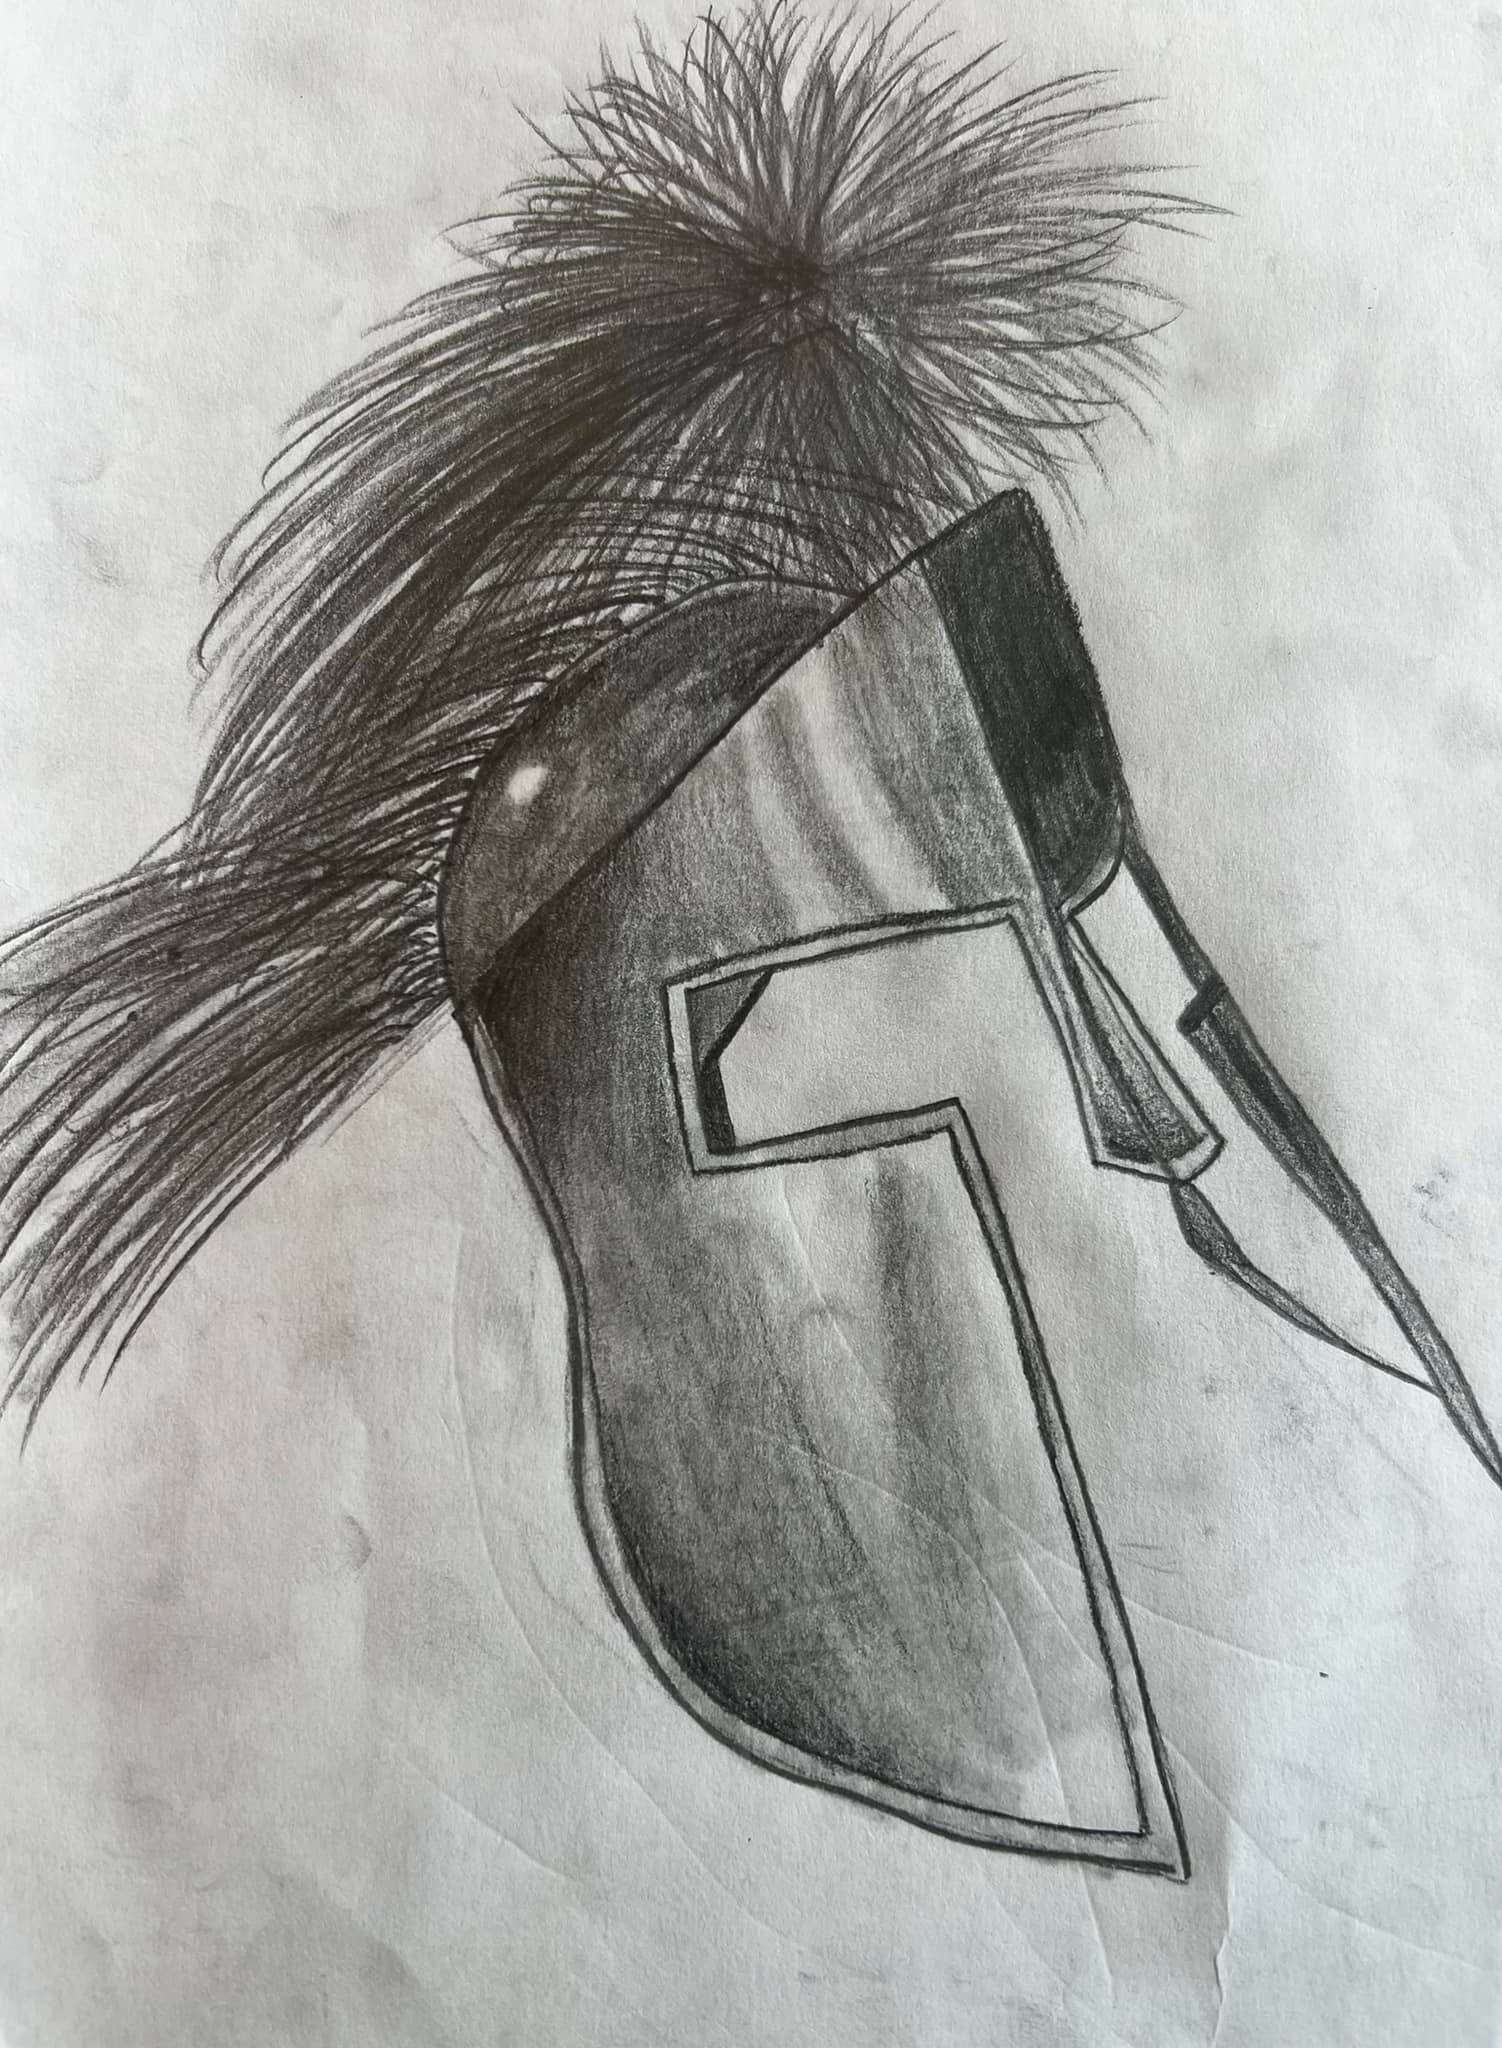 Pencil drawing of Spartan helmet with plume